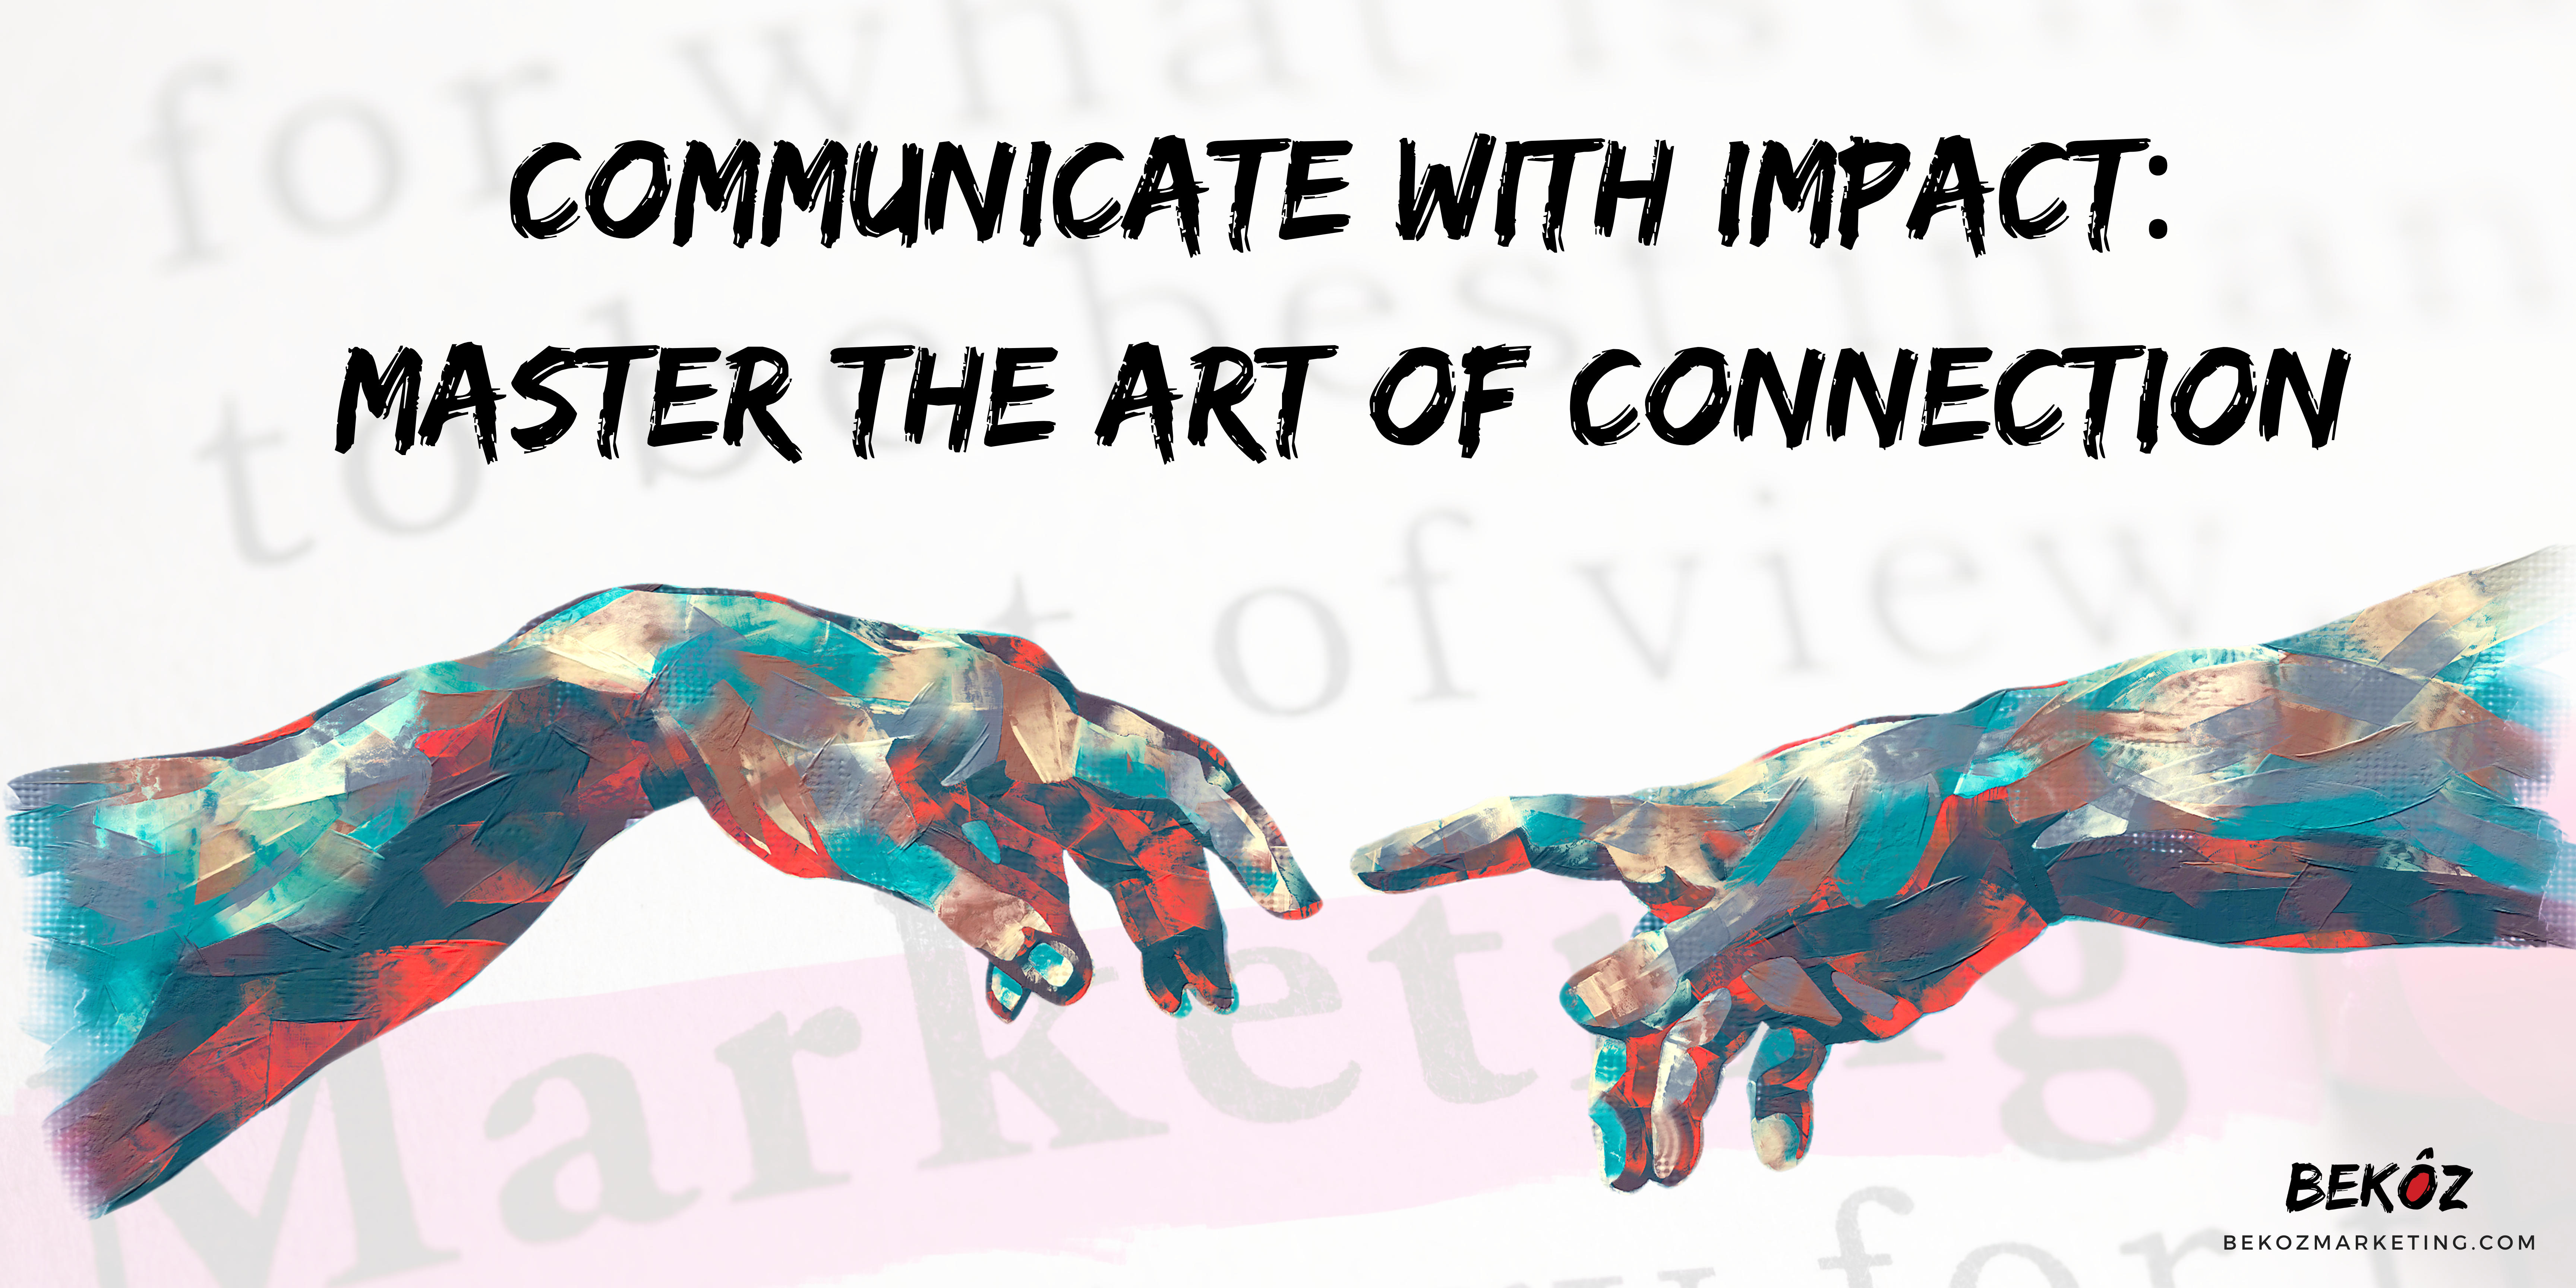 The Art of Connection Through Impactful Communication